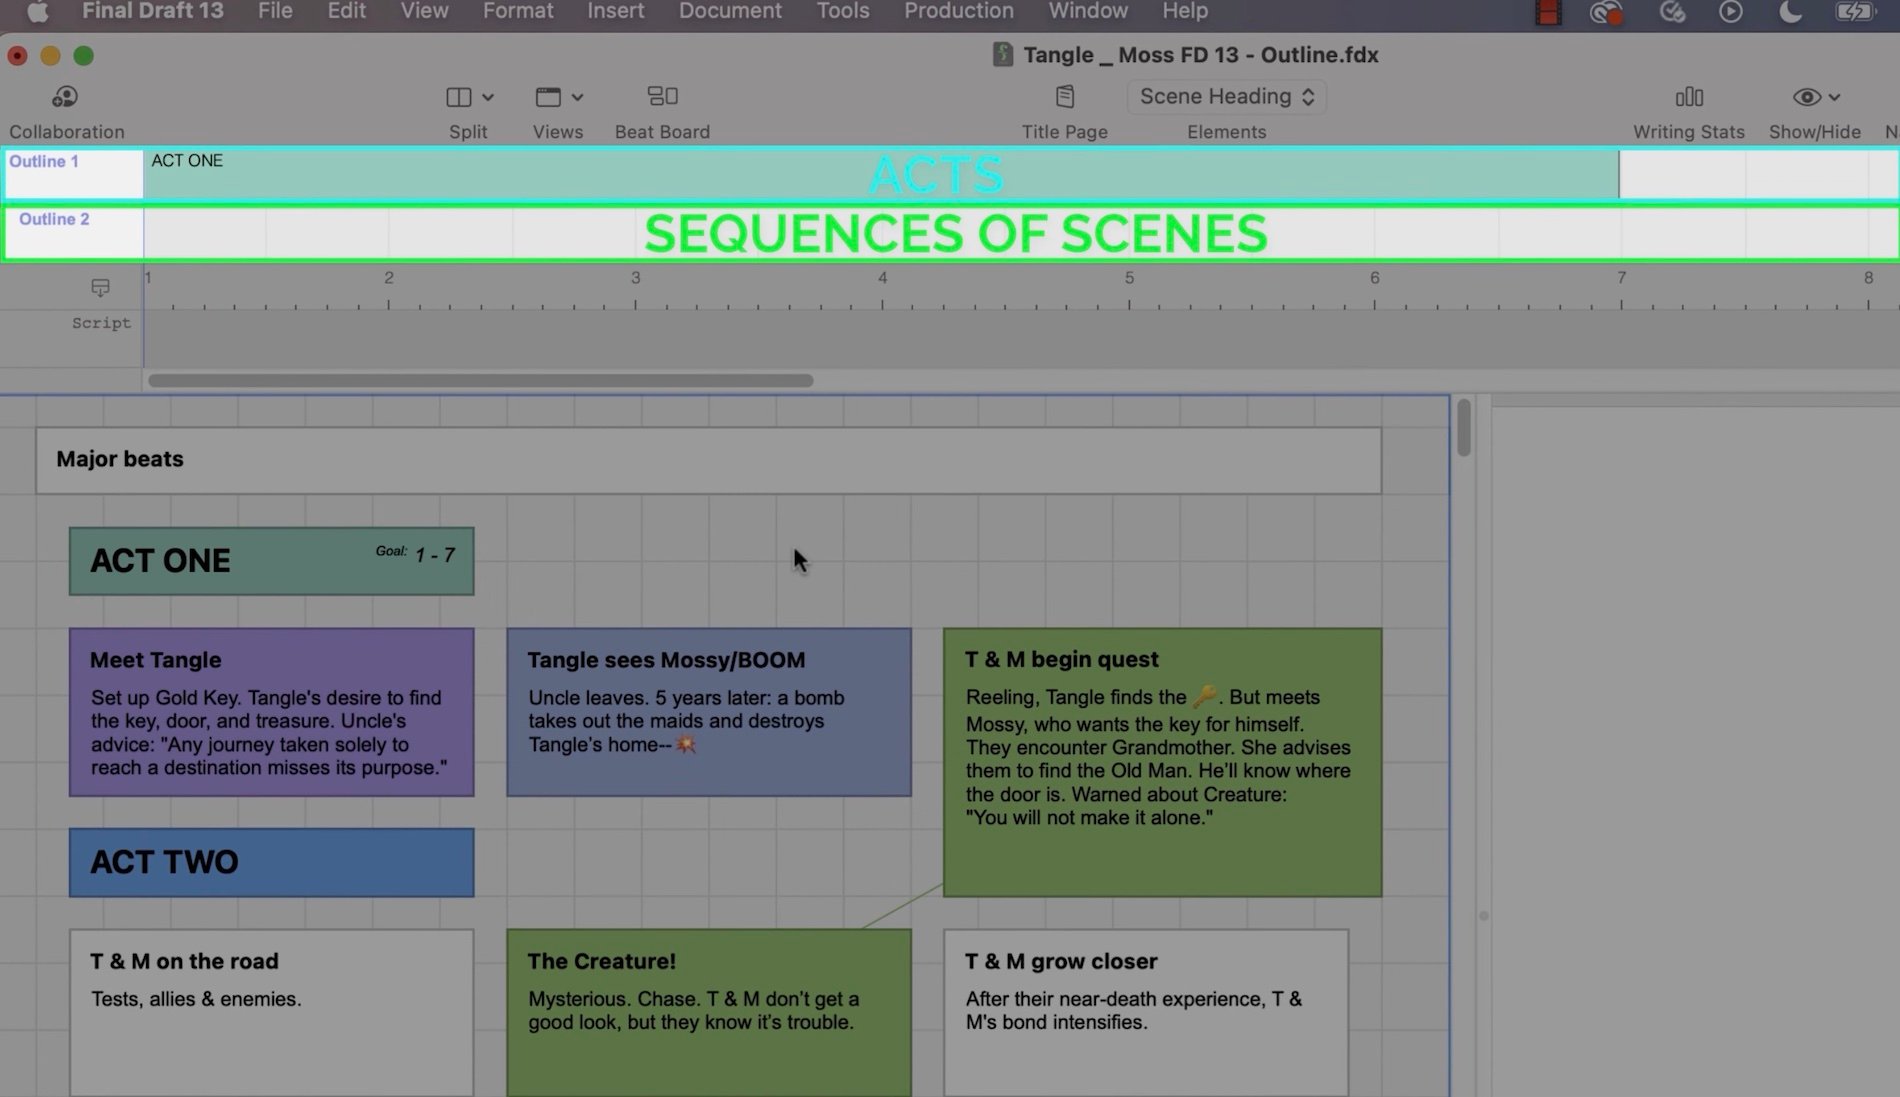 Acts and Sequences of Scenes in Final Draft 13, Map Out Your Story With Personalized Outlining in Final Draft 13